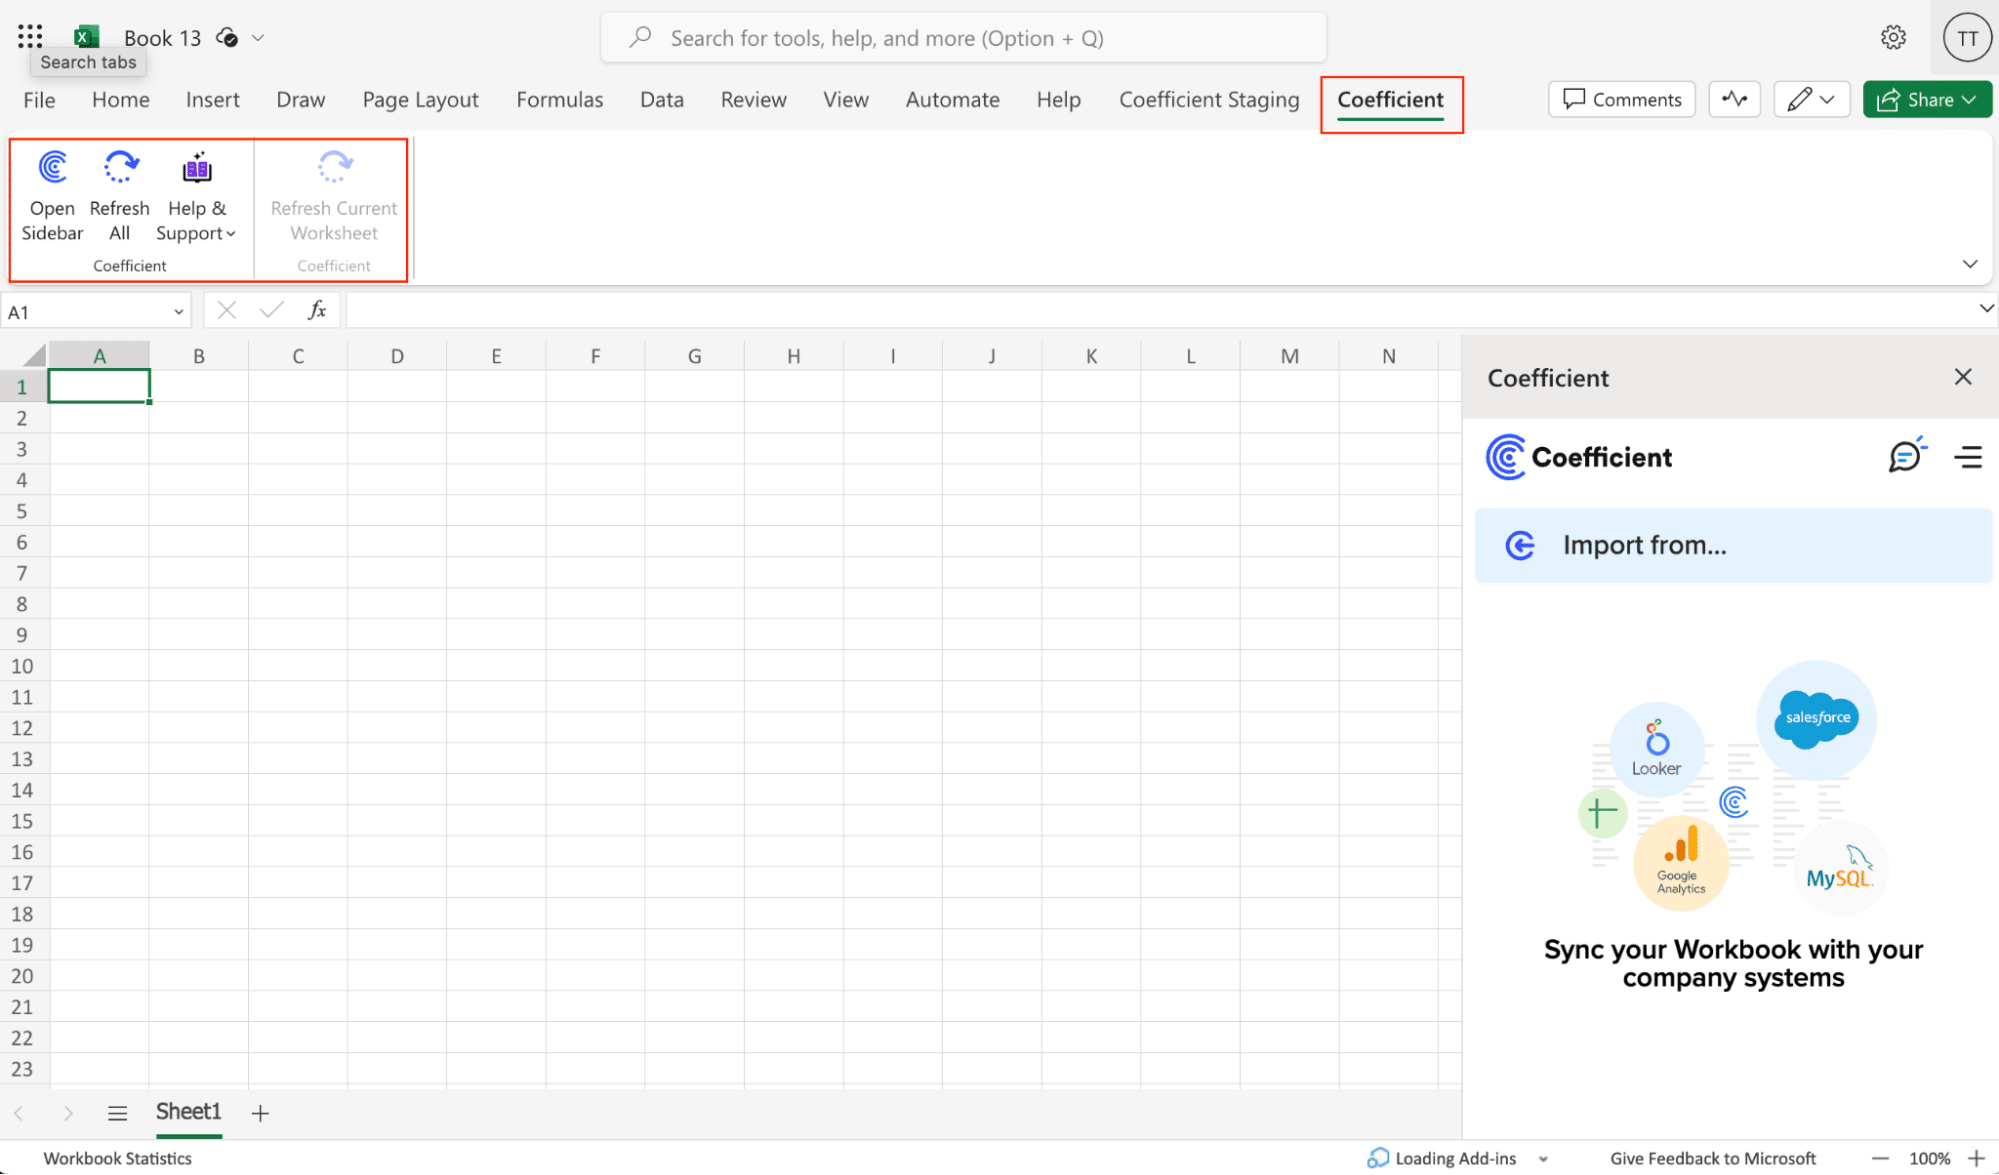 Launching Coefficient by clicking 'Open Sidebar' in Excel to start importing data.